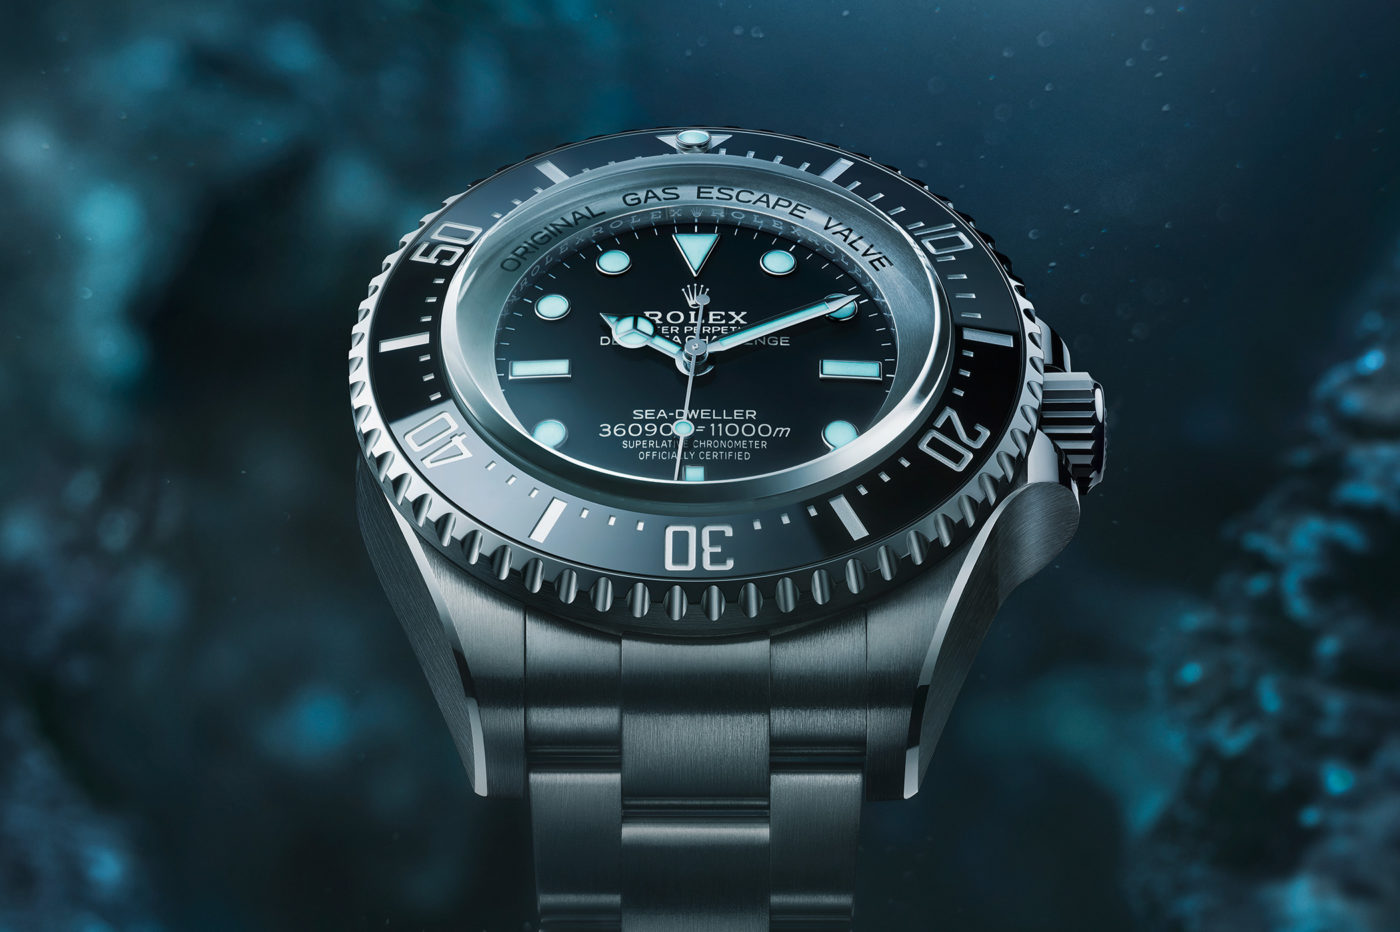 Rolex Oyster Perpetual Deepsea Challenge